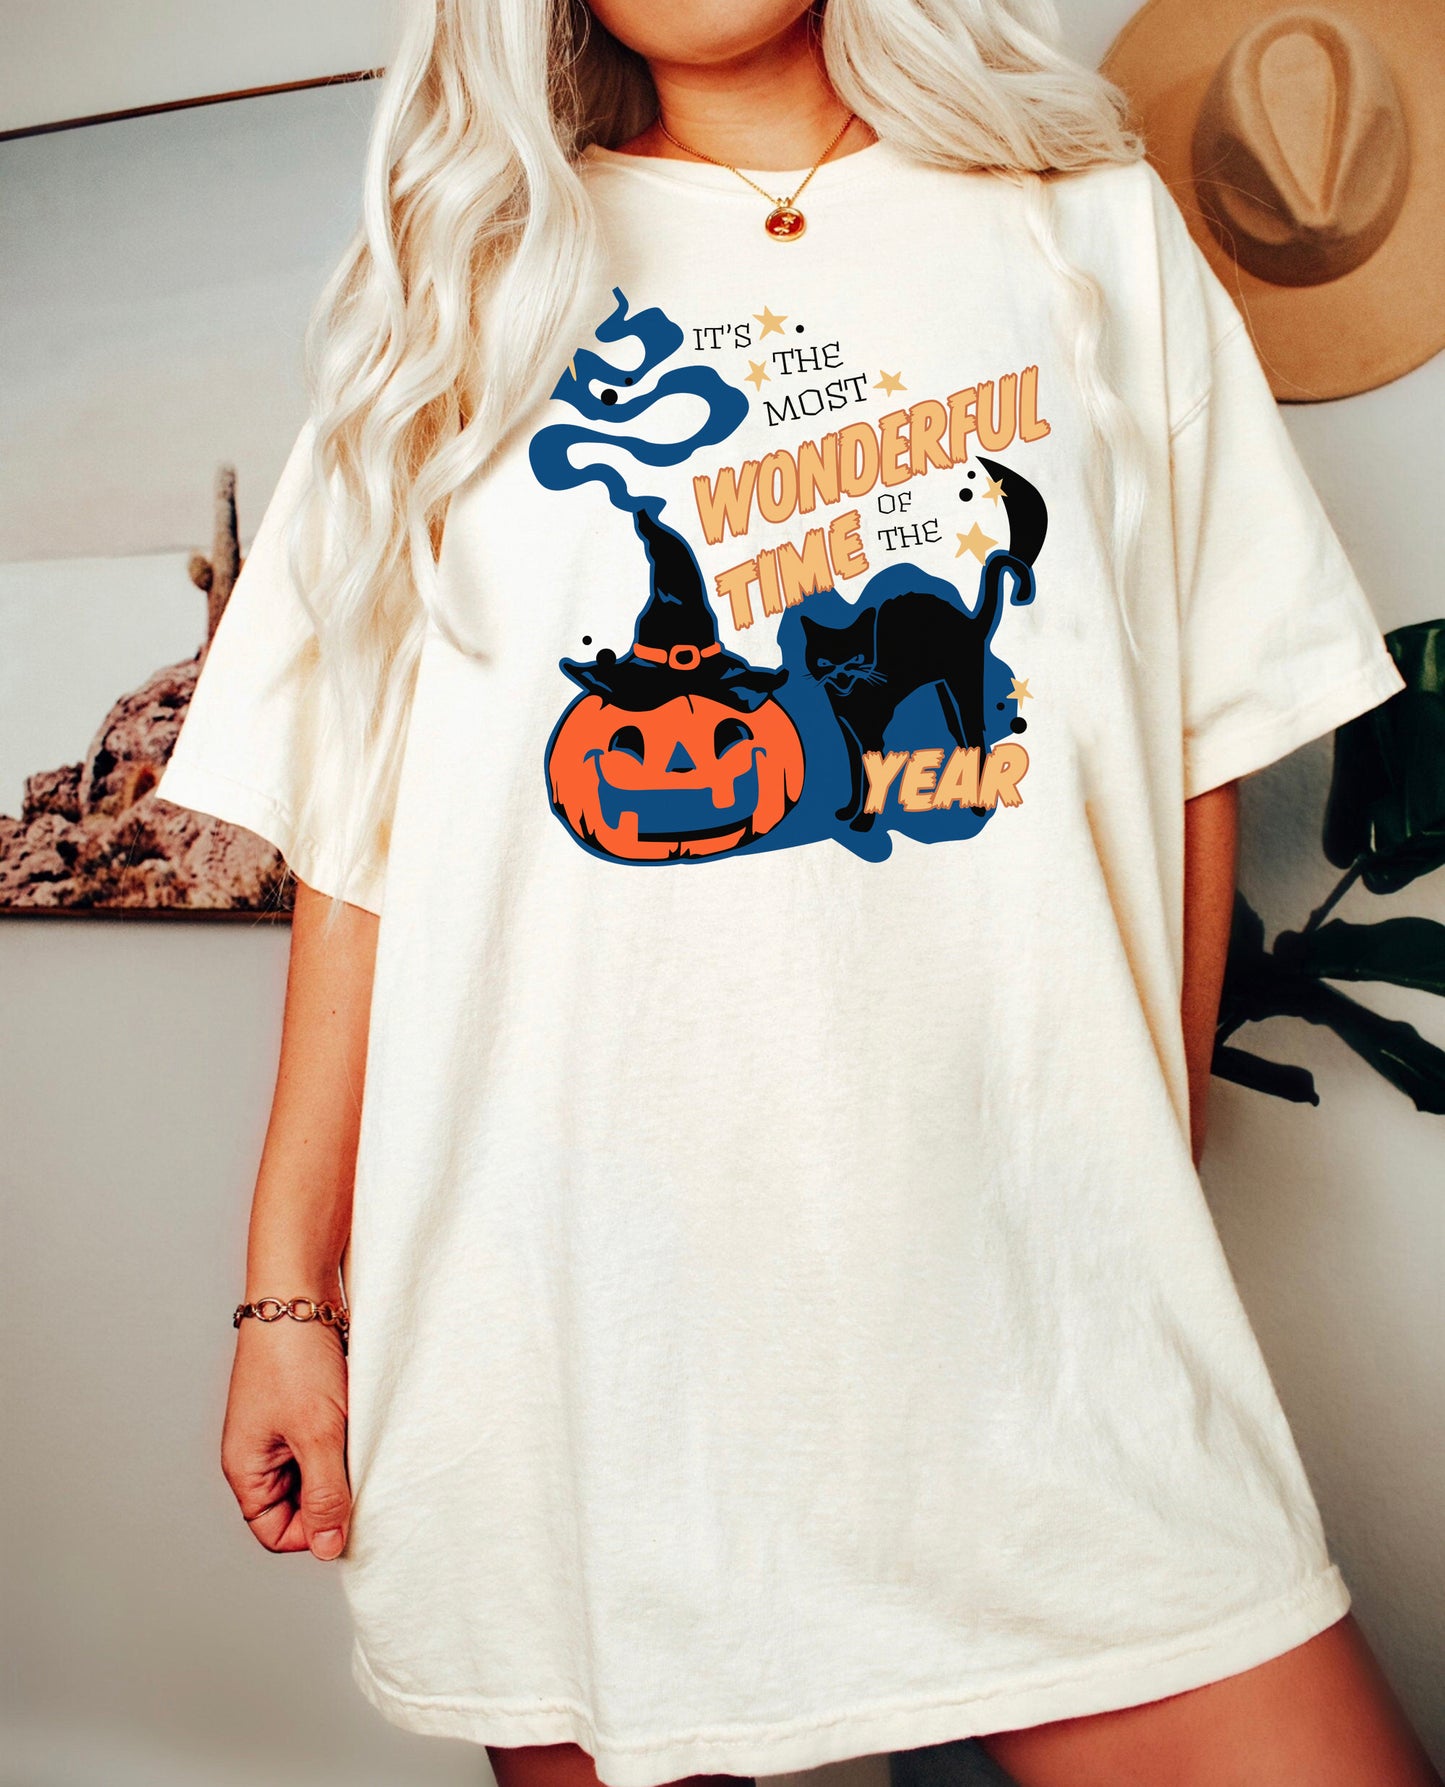 The Most Wonderful Time of the Year Halloween Shirt